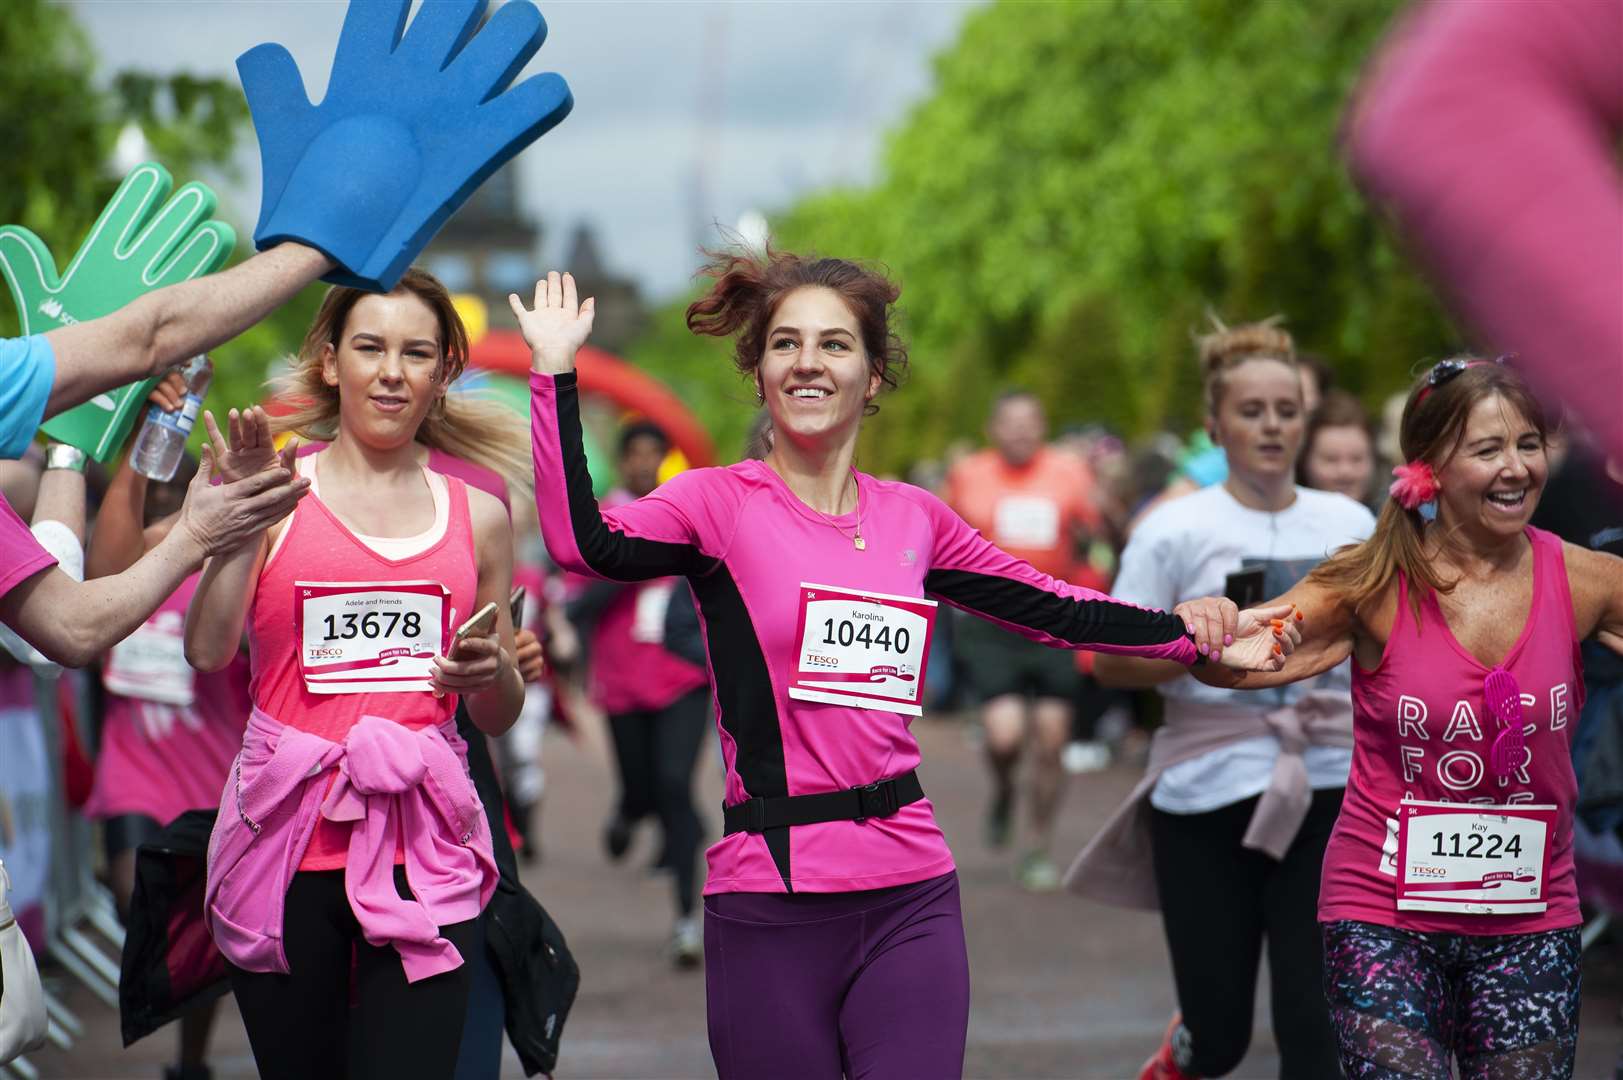 Race for Life will not go ahead this year due to the pandemic. Picture: Cancer Research UK